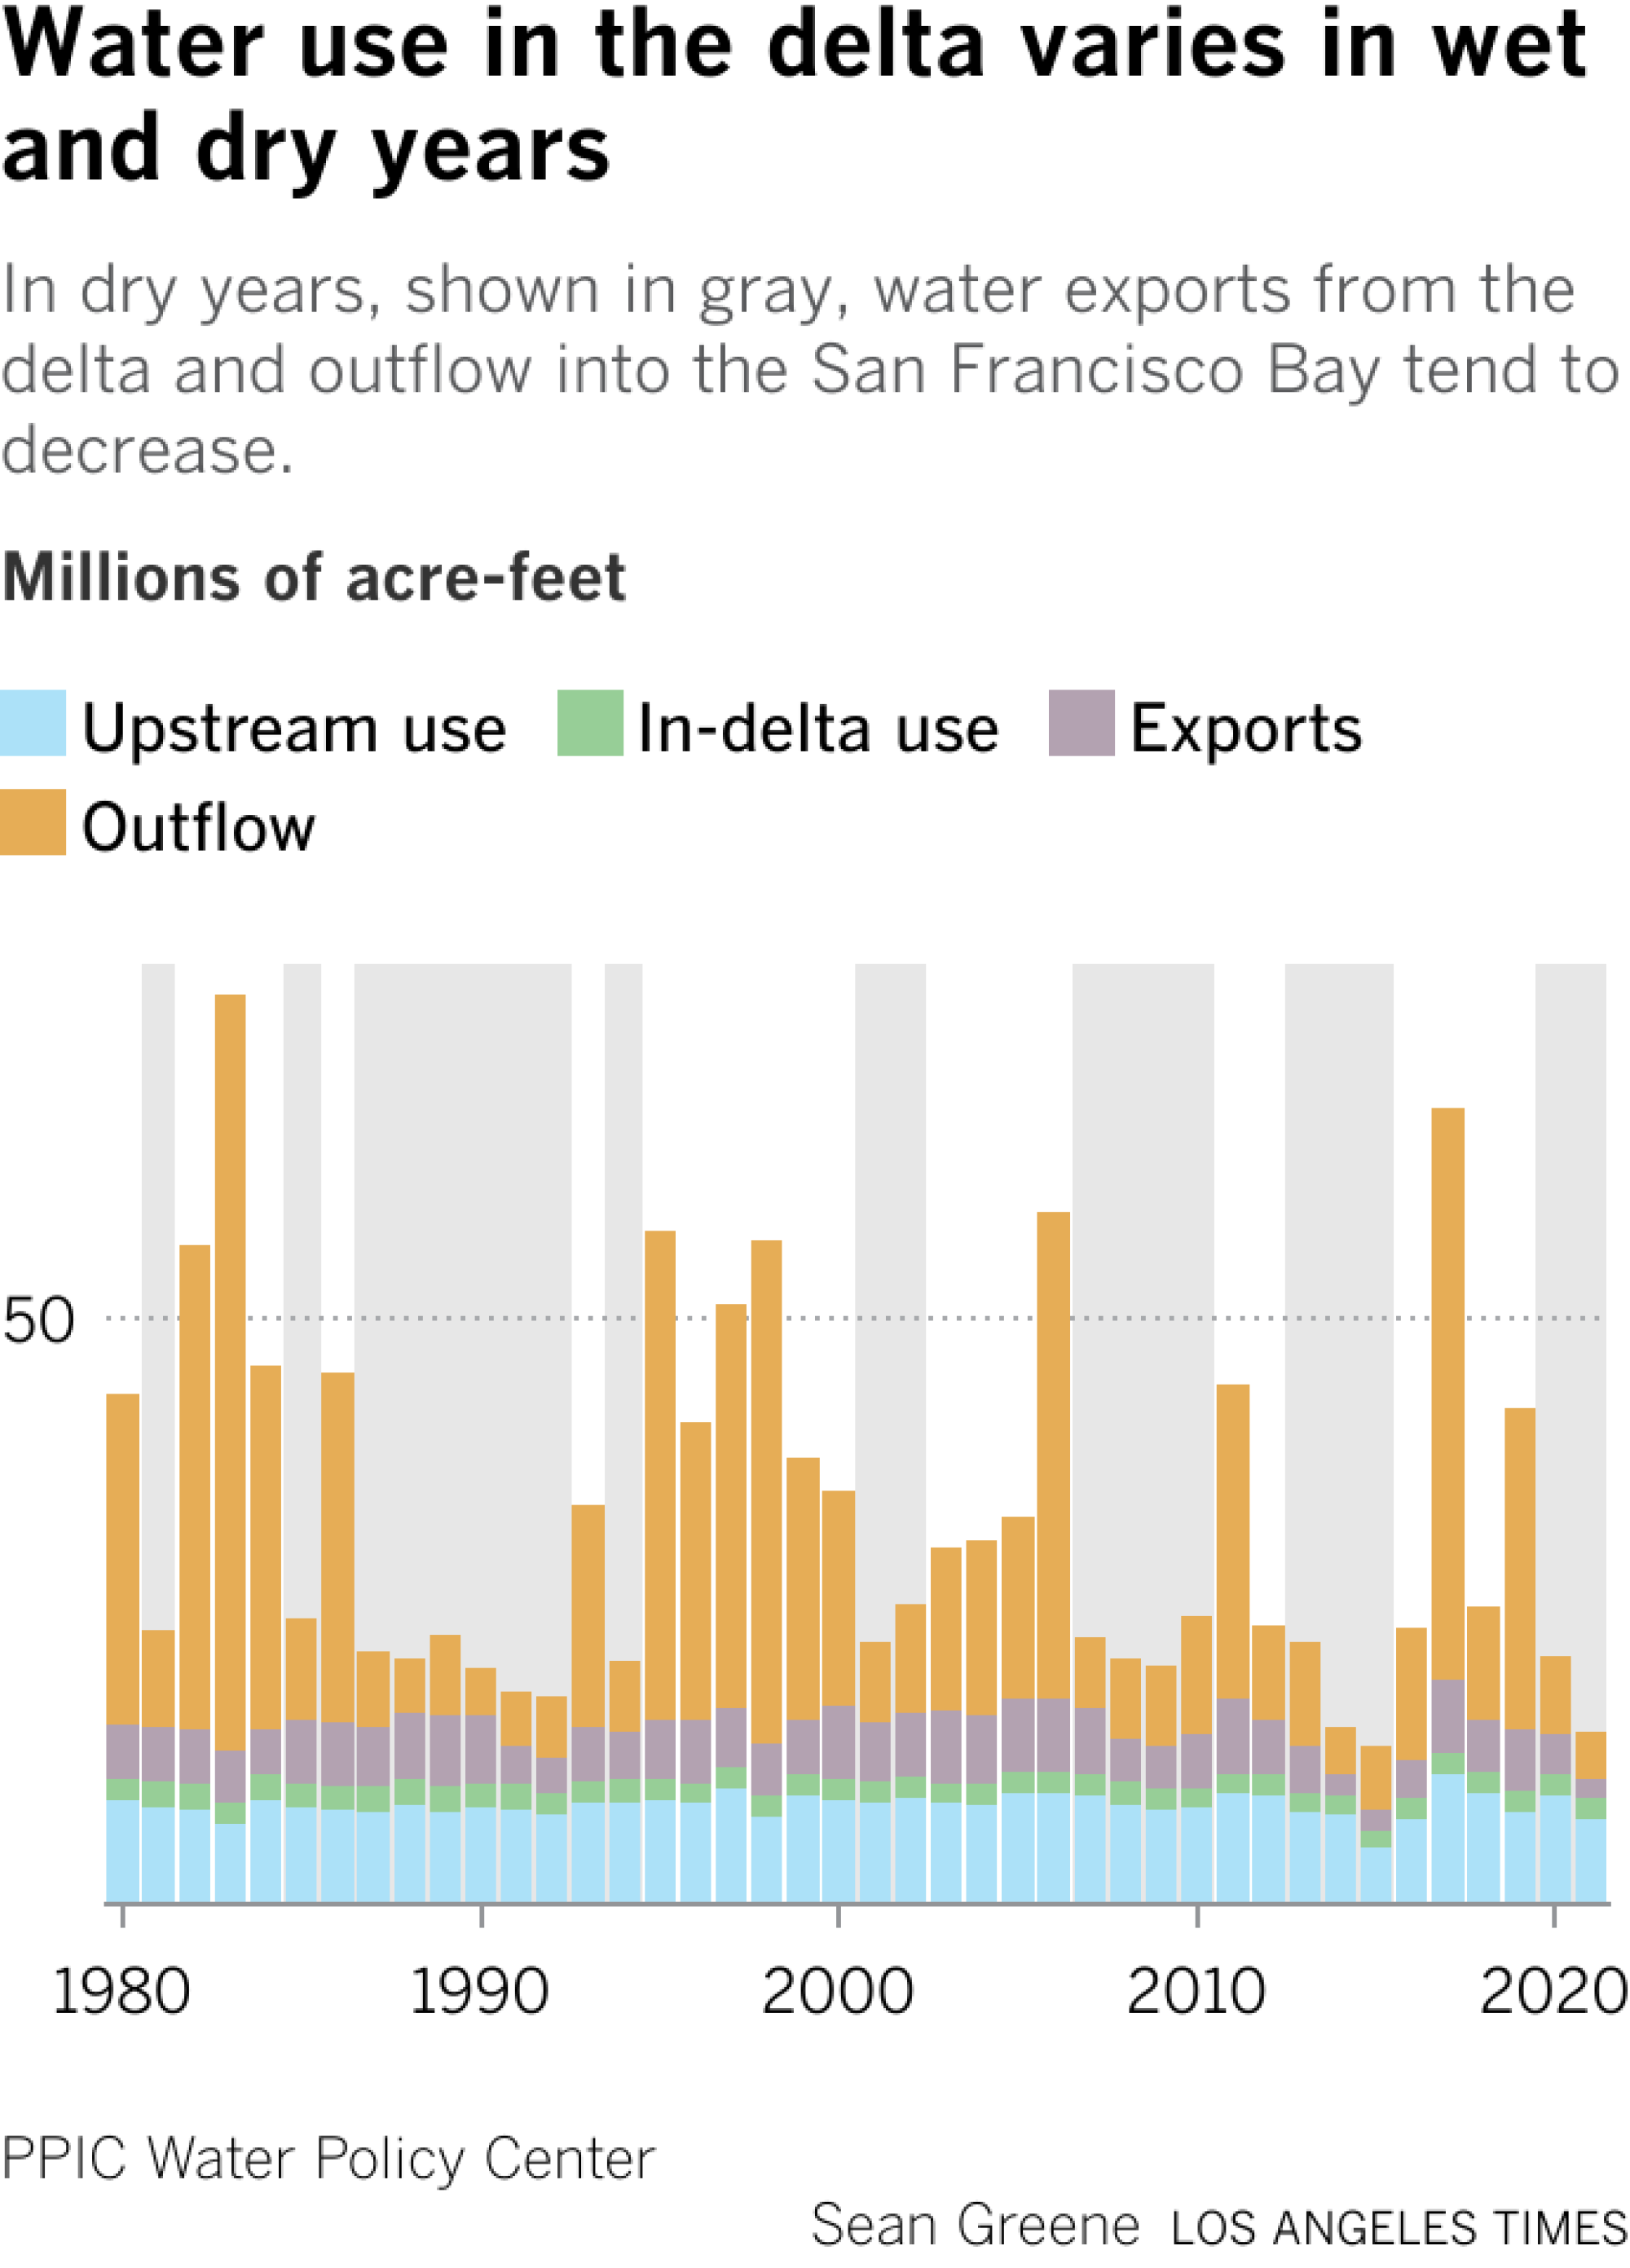 In dry years, shown in gray, water exports from the delta and outflow into the San Francisco Bay tend to decrease.